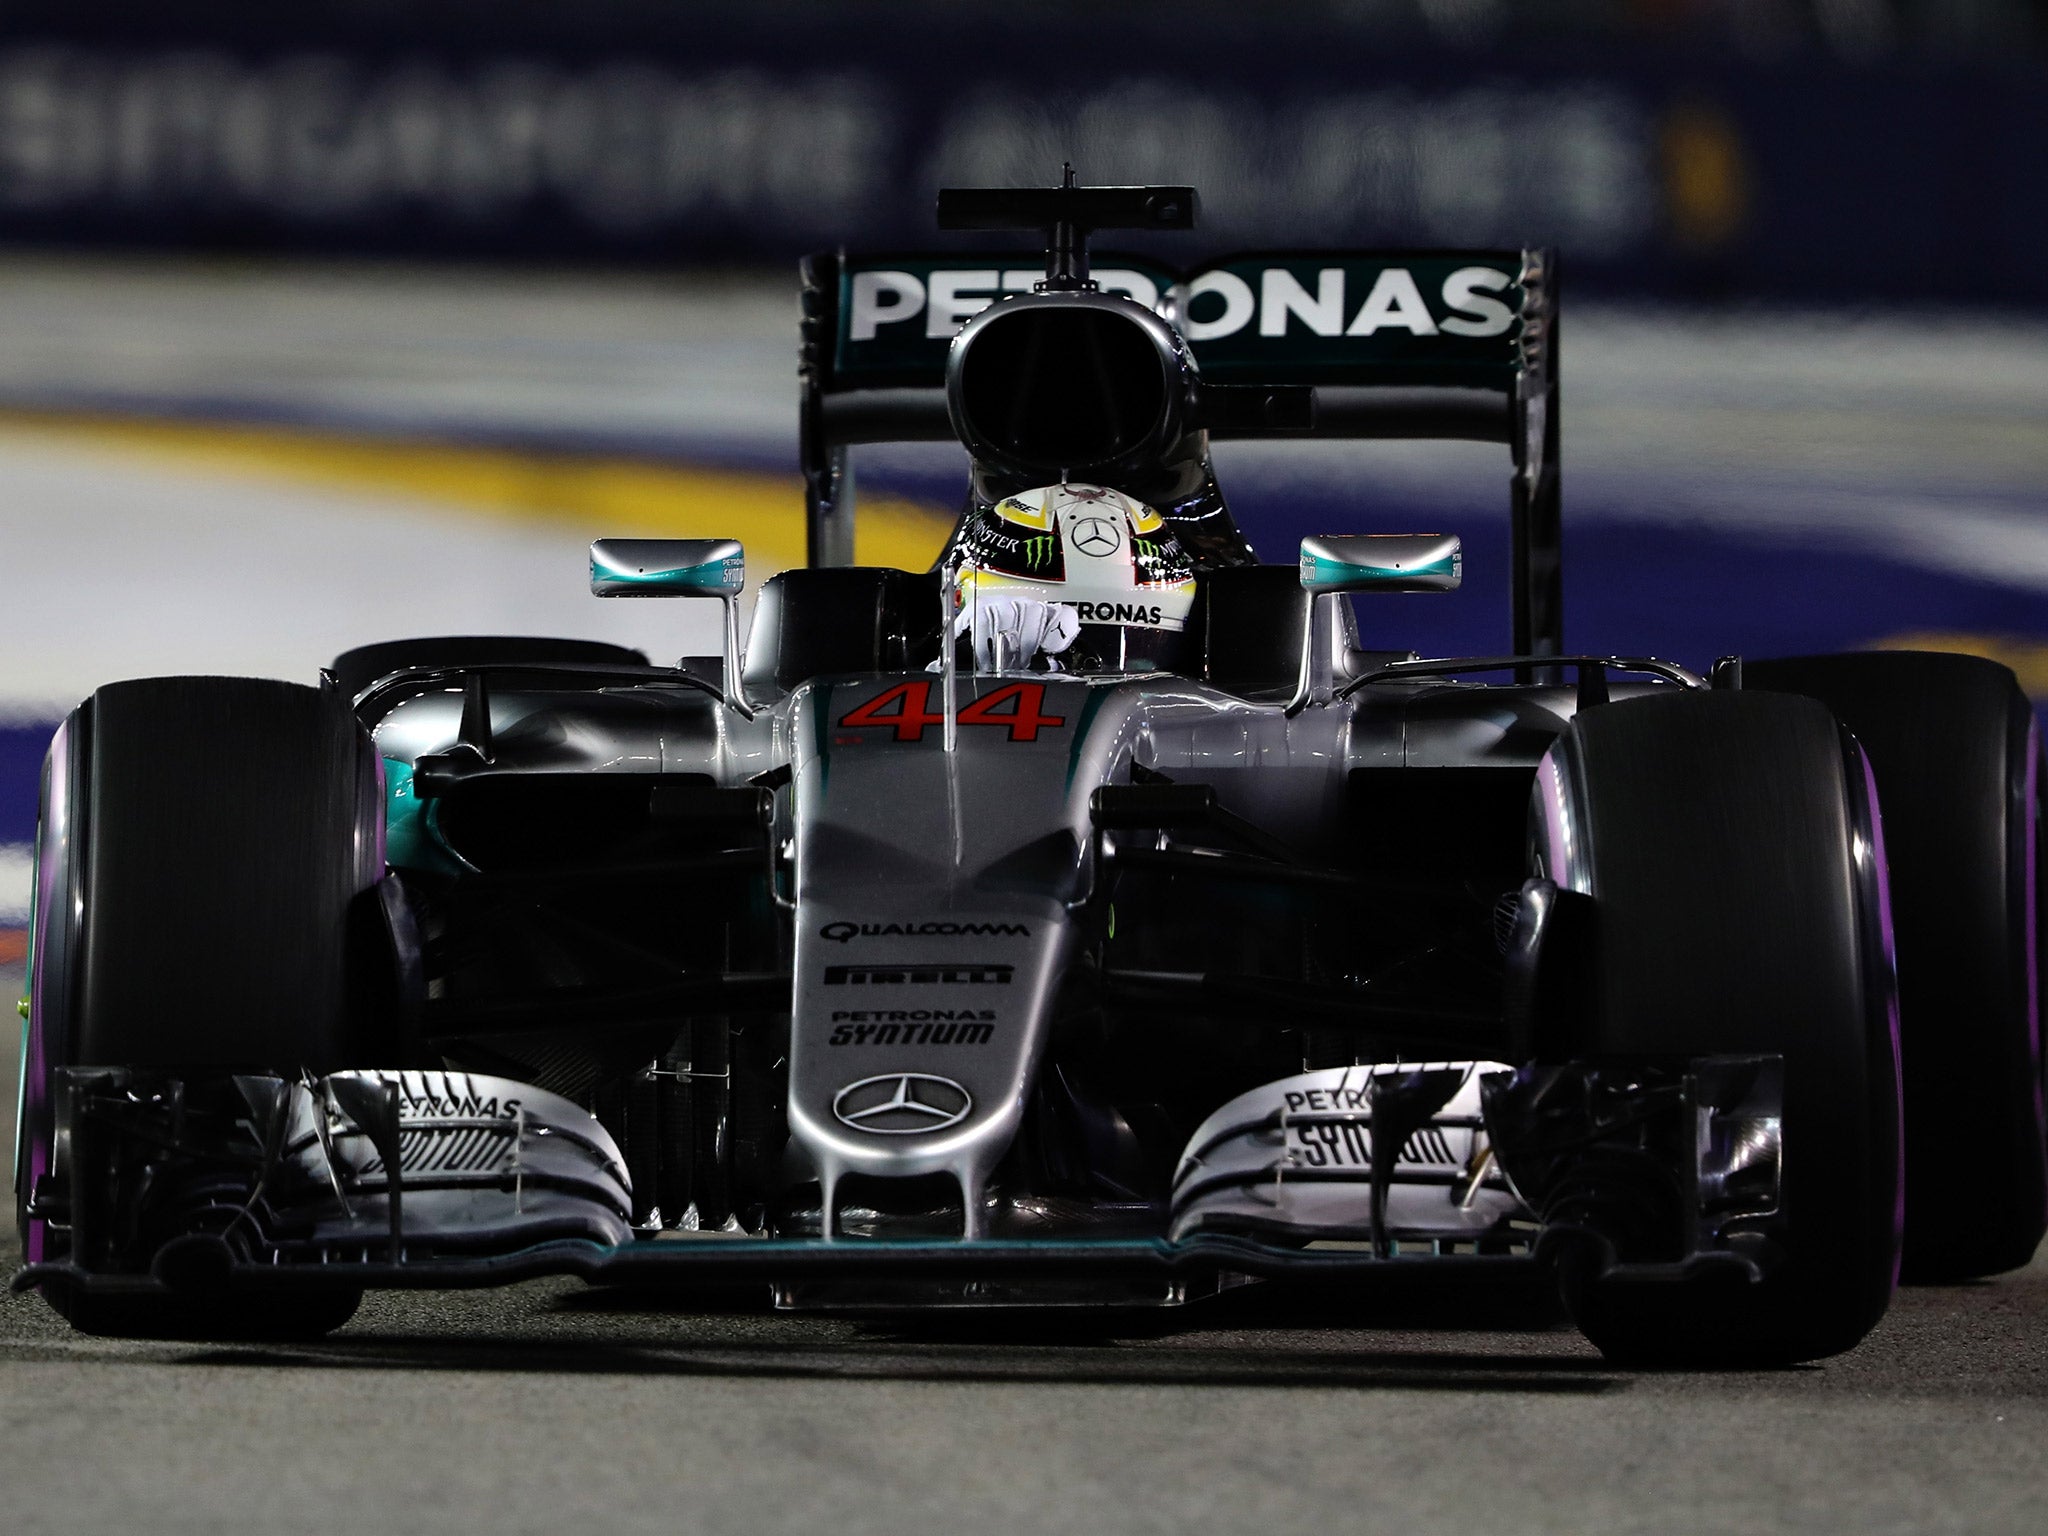 Hamilton struggled to match Rosberg's pace this week